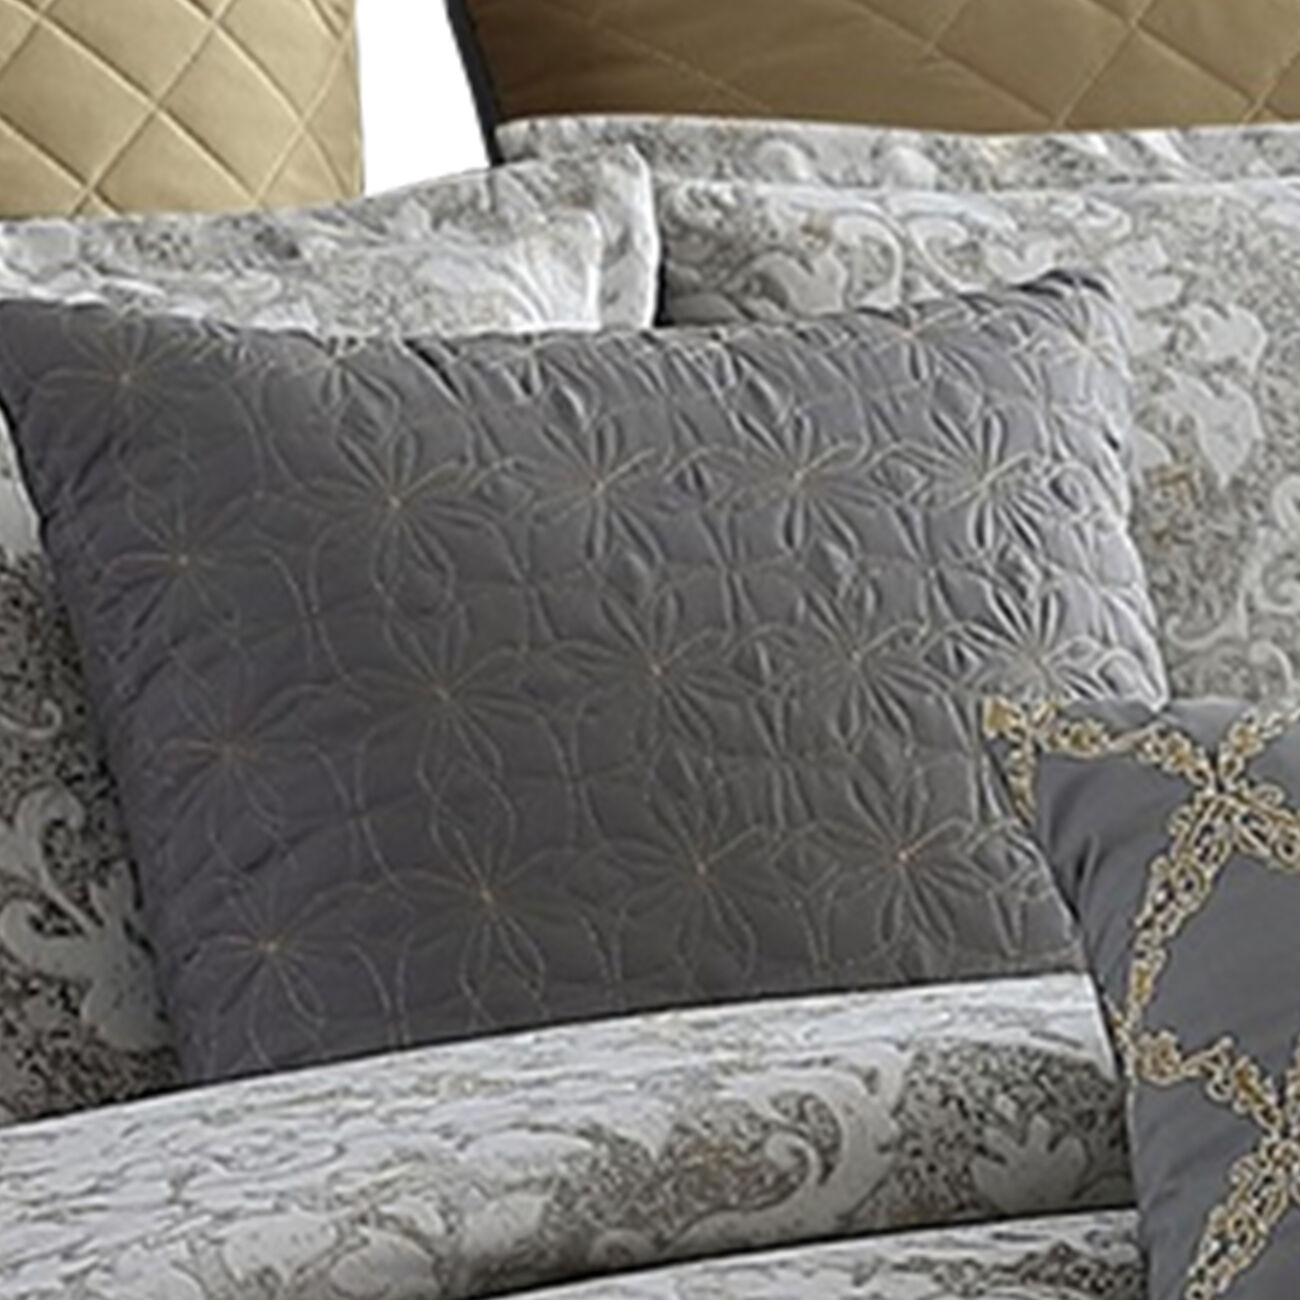 9 Piece King Polyester Comforter Set with Medallion Print, Gray and Gold